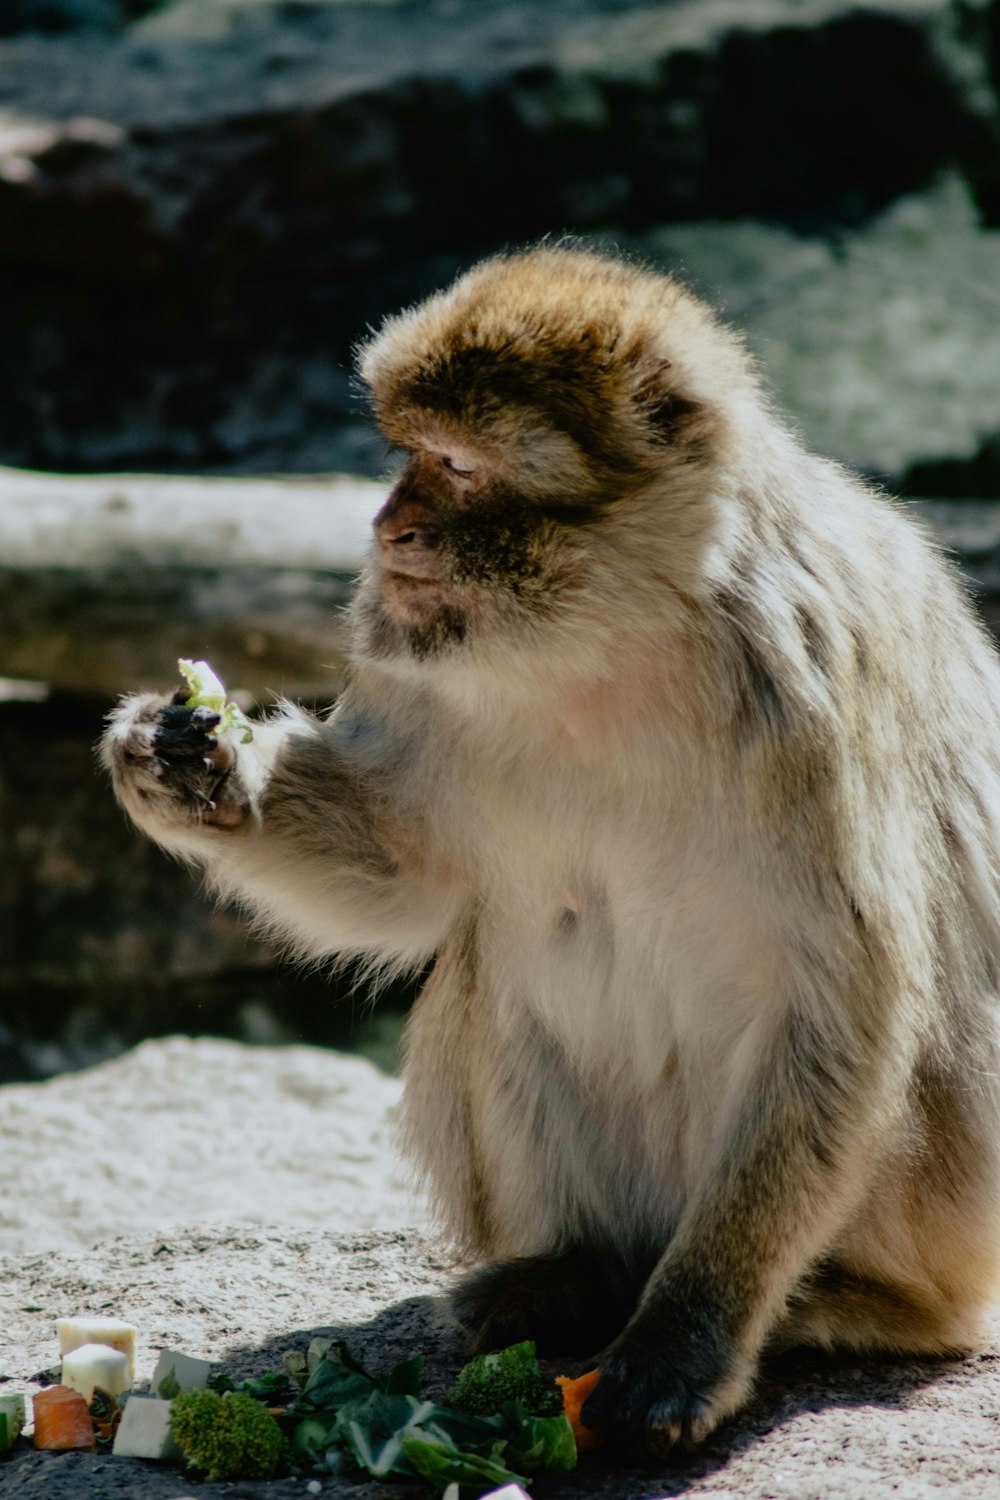 brown and white monkey eating fruit